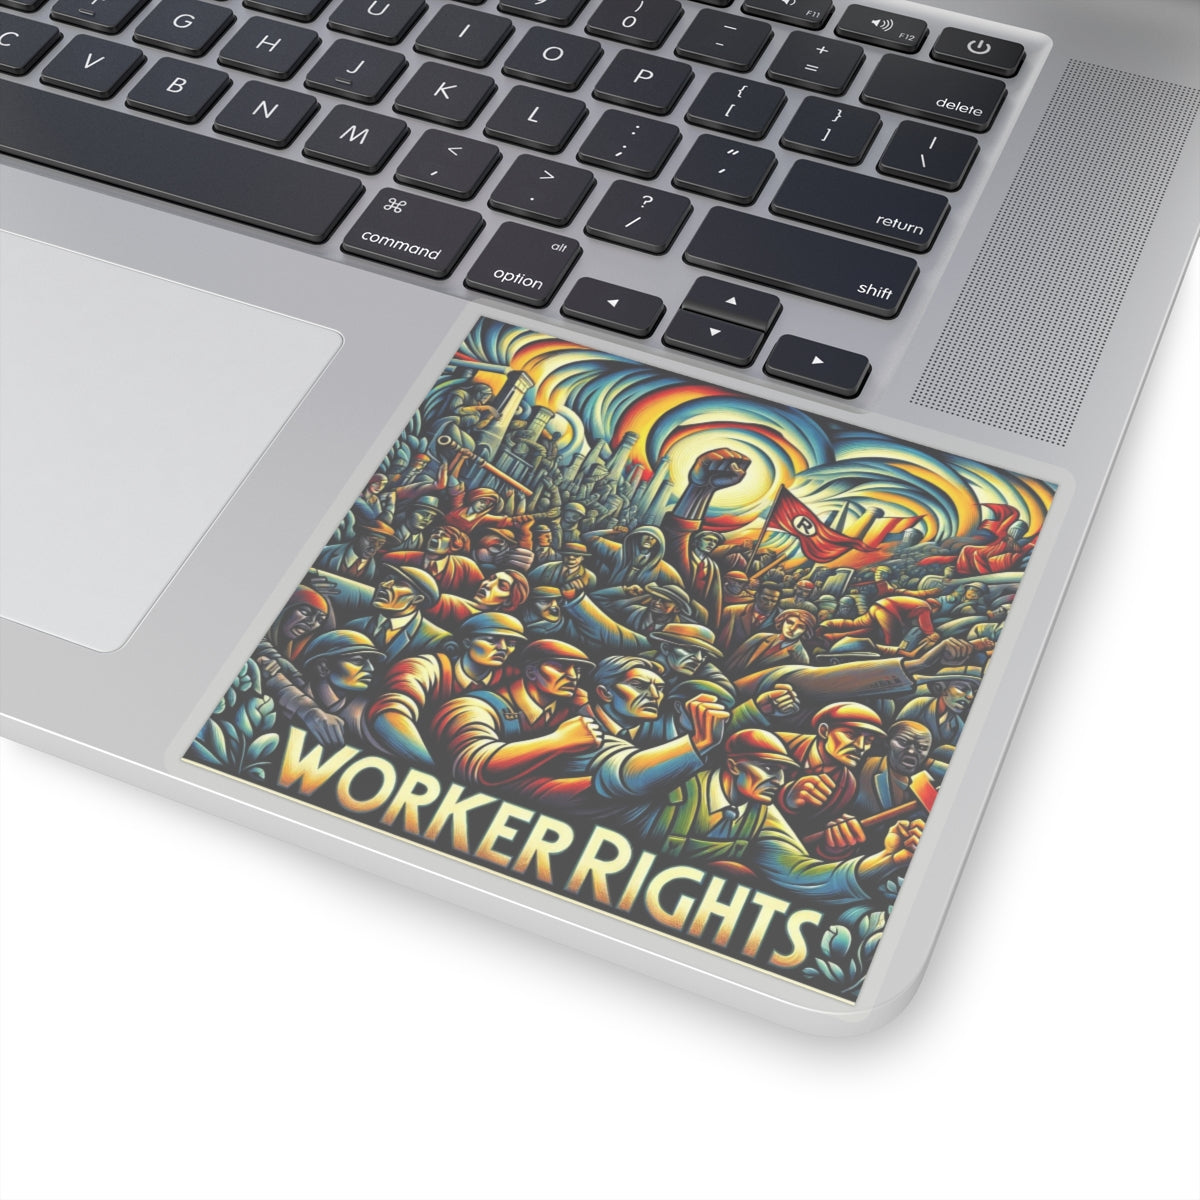 Bold and Uncompromising Statement Sticker: Worker Rights!